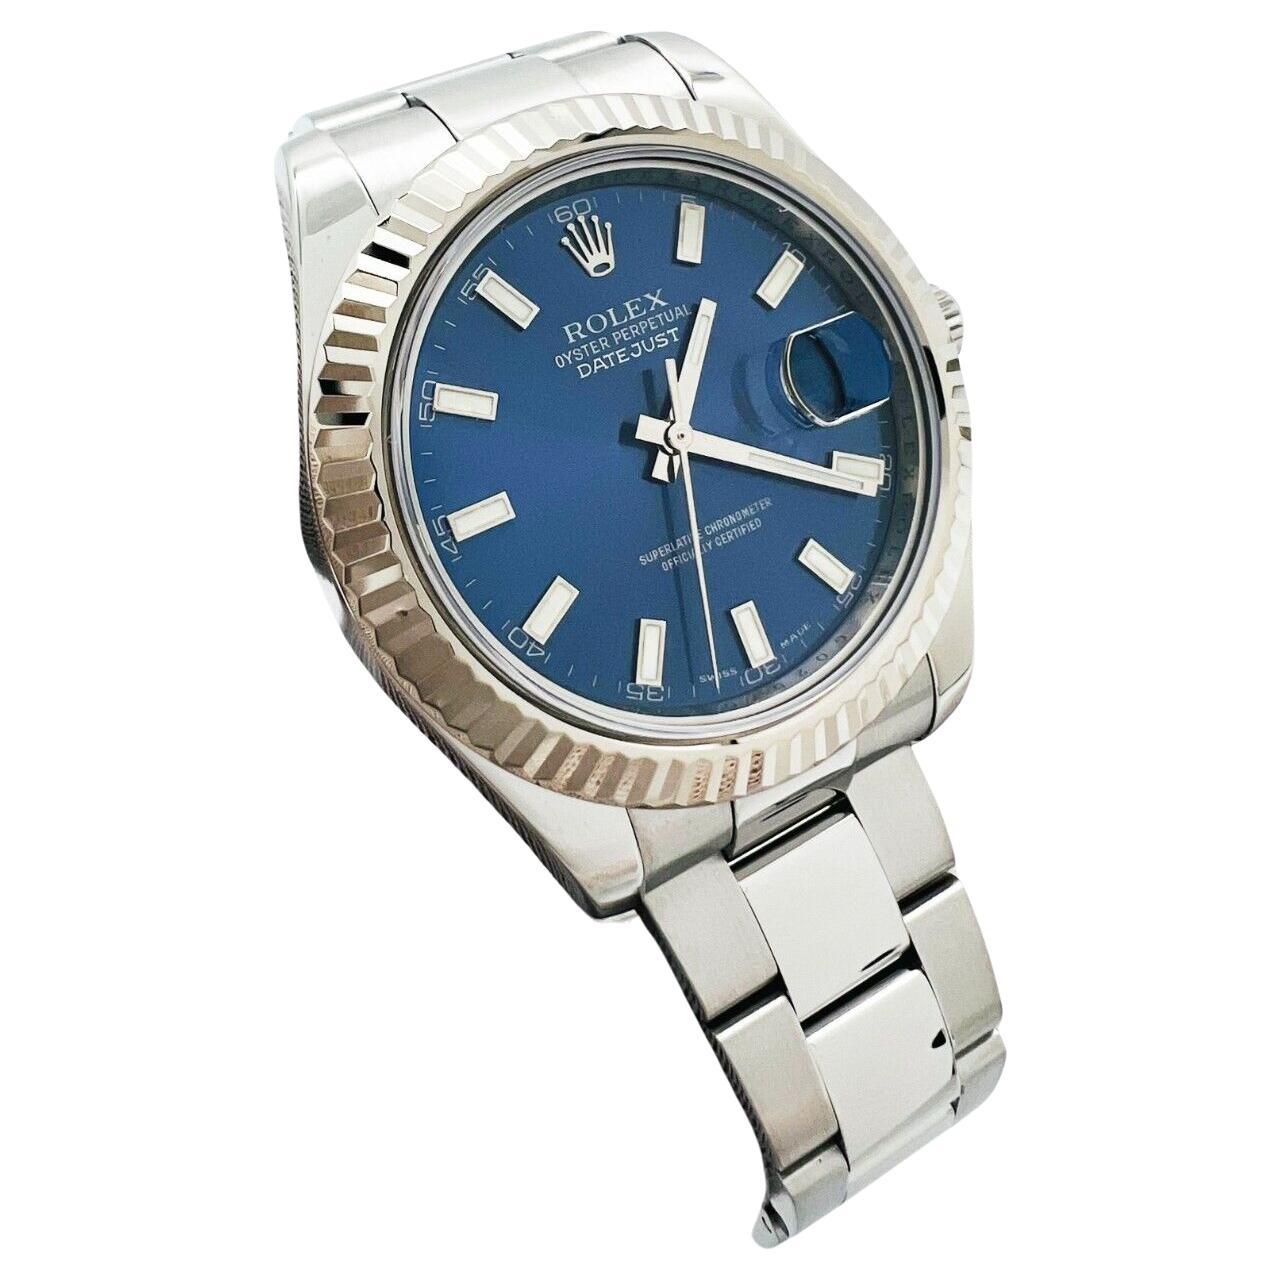 Rolex 116334 Datejust II 41mm Blue Dial Stainless Steel Box Paper For Sale